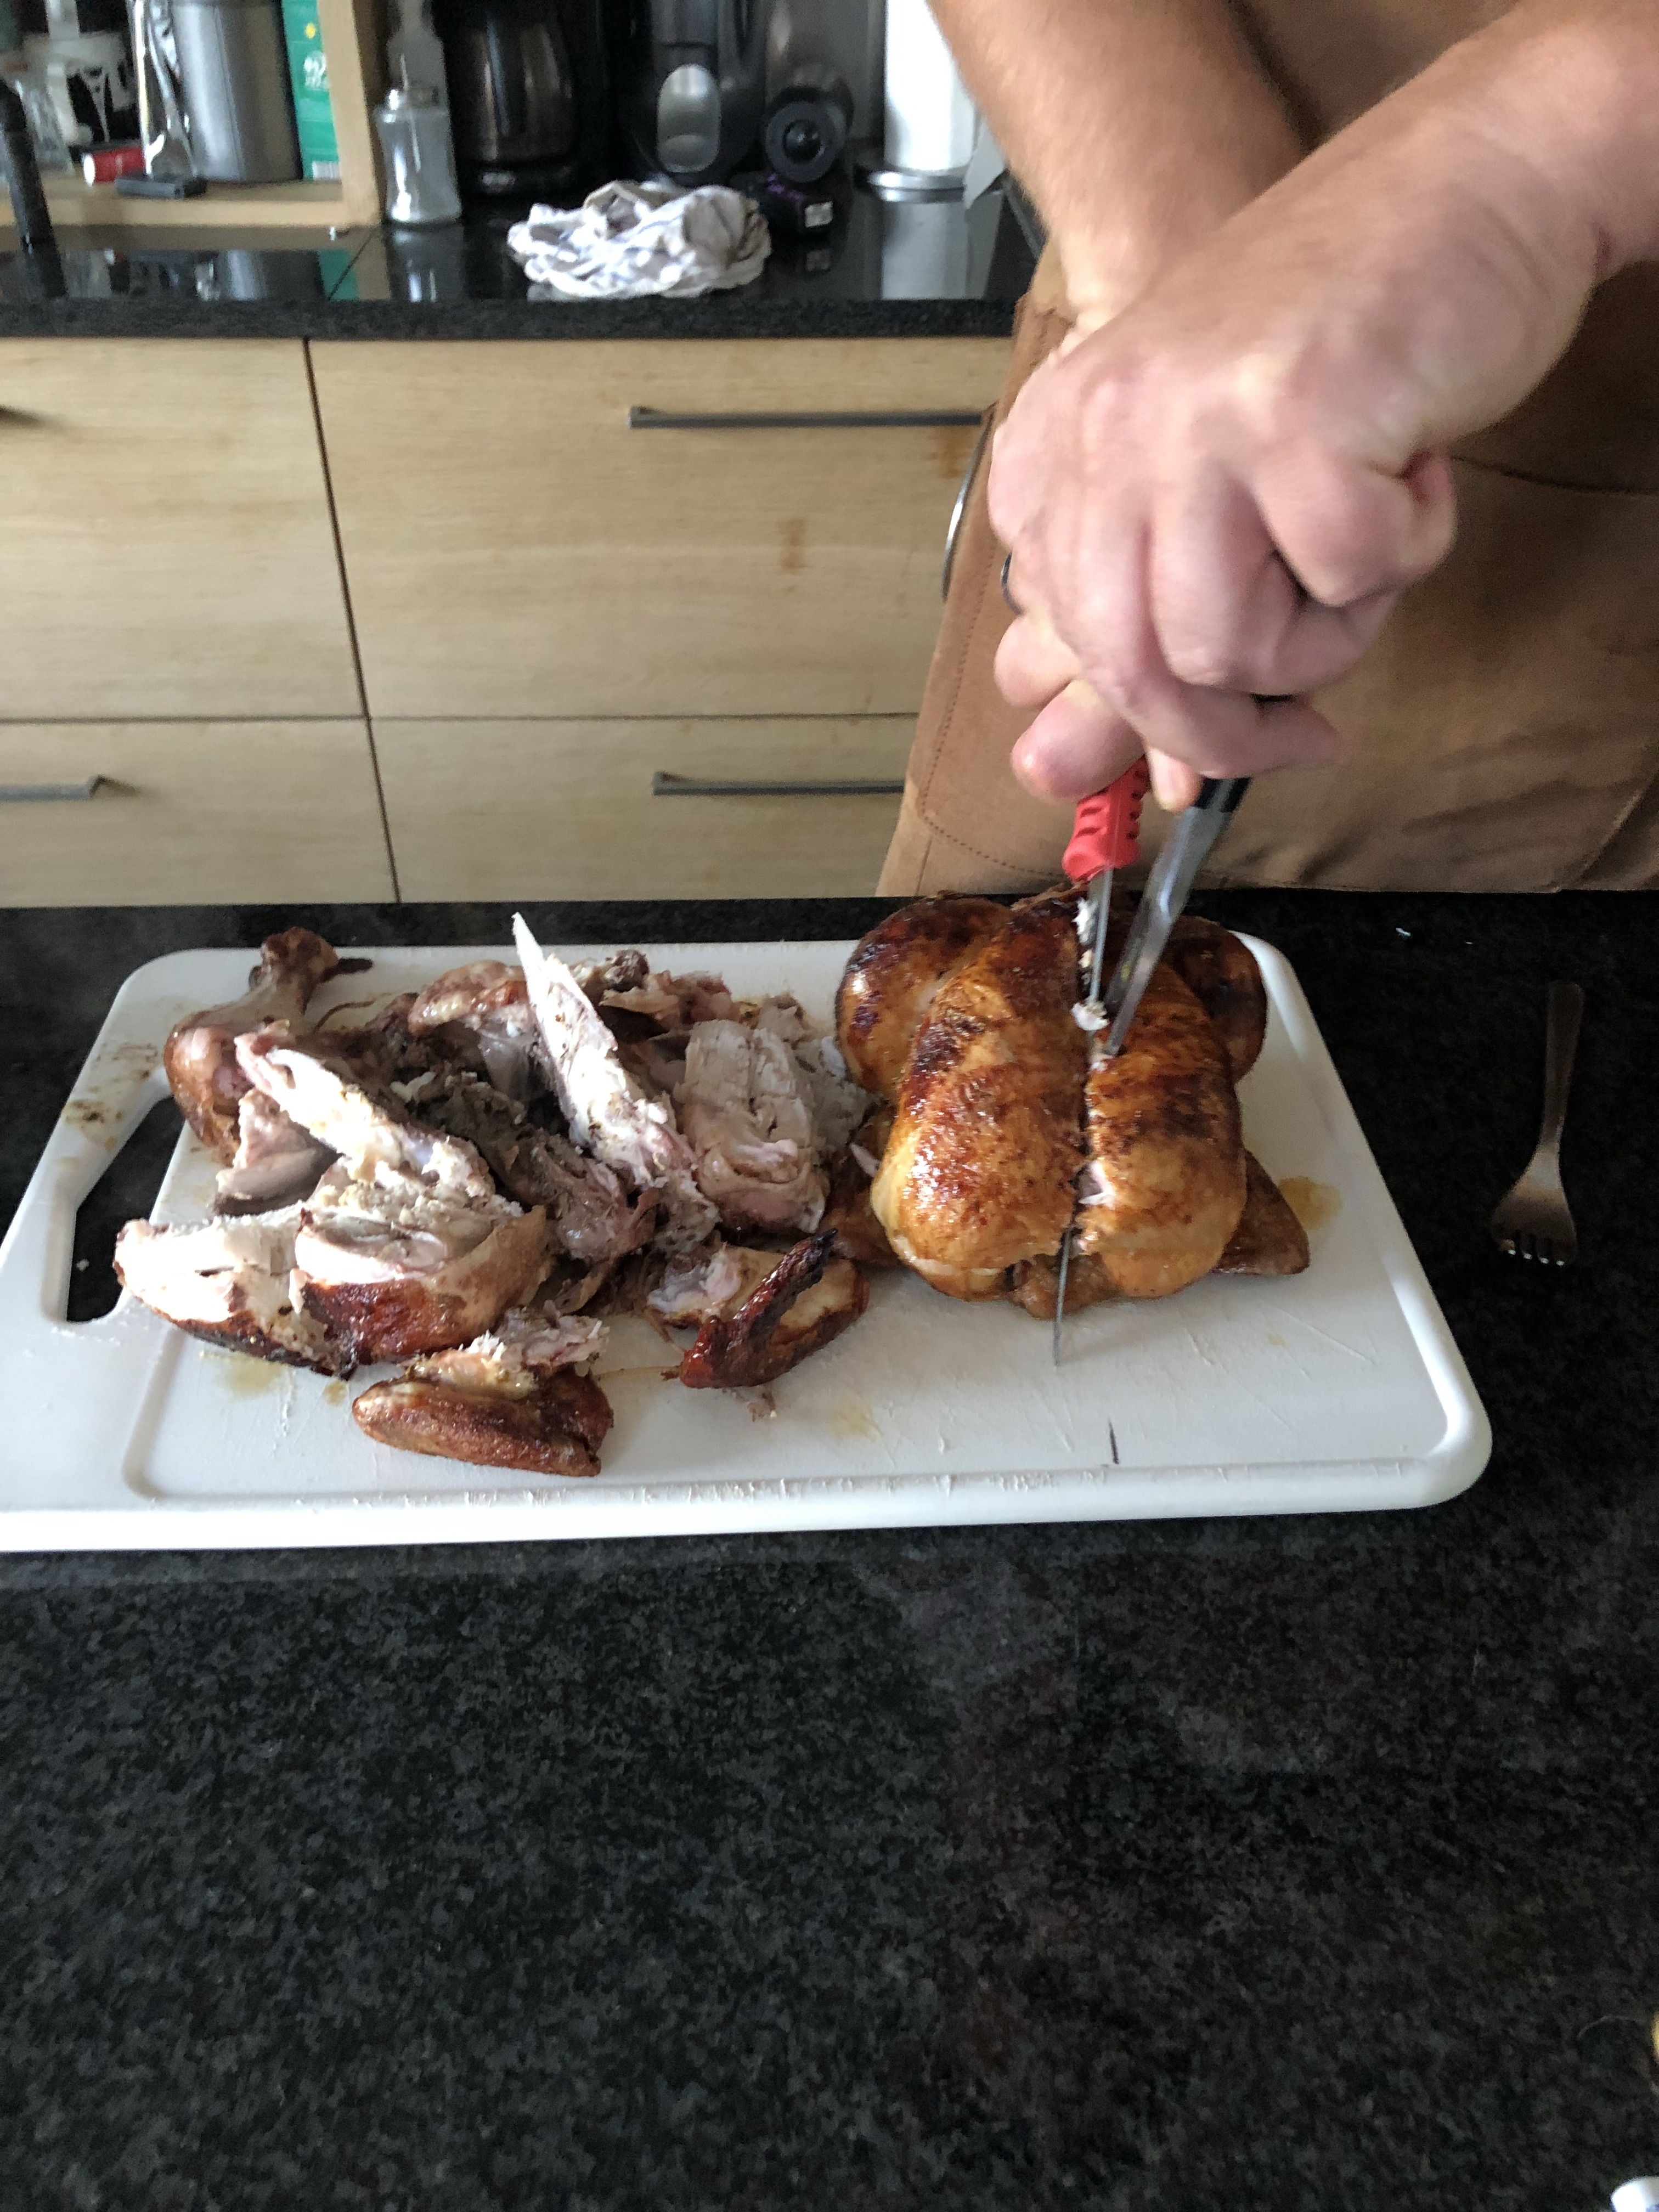 slicing up a rotisserie chicken on a cutting board